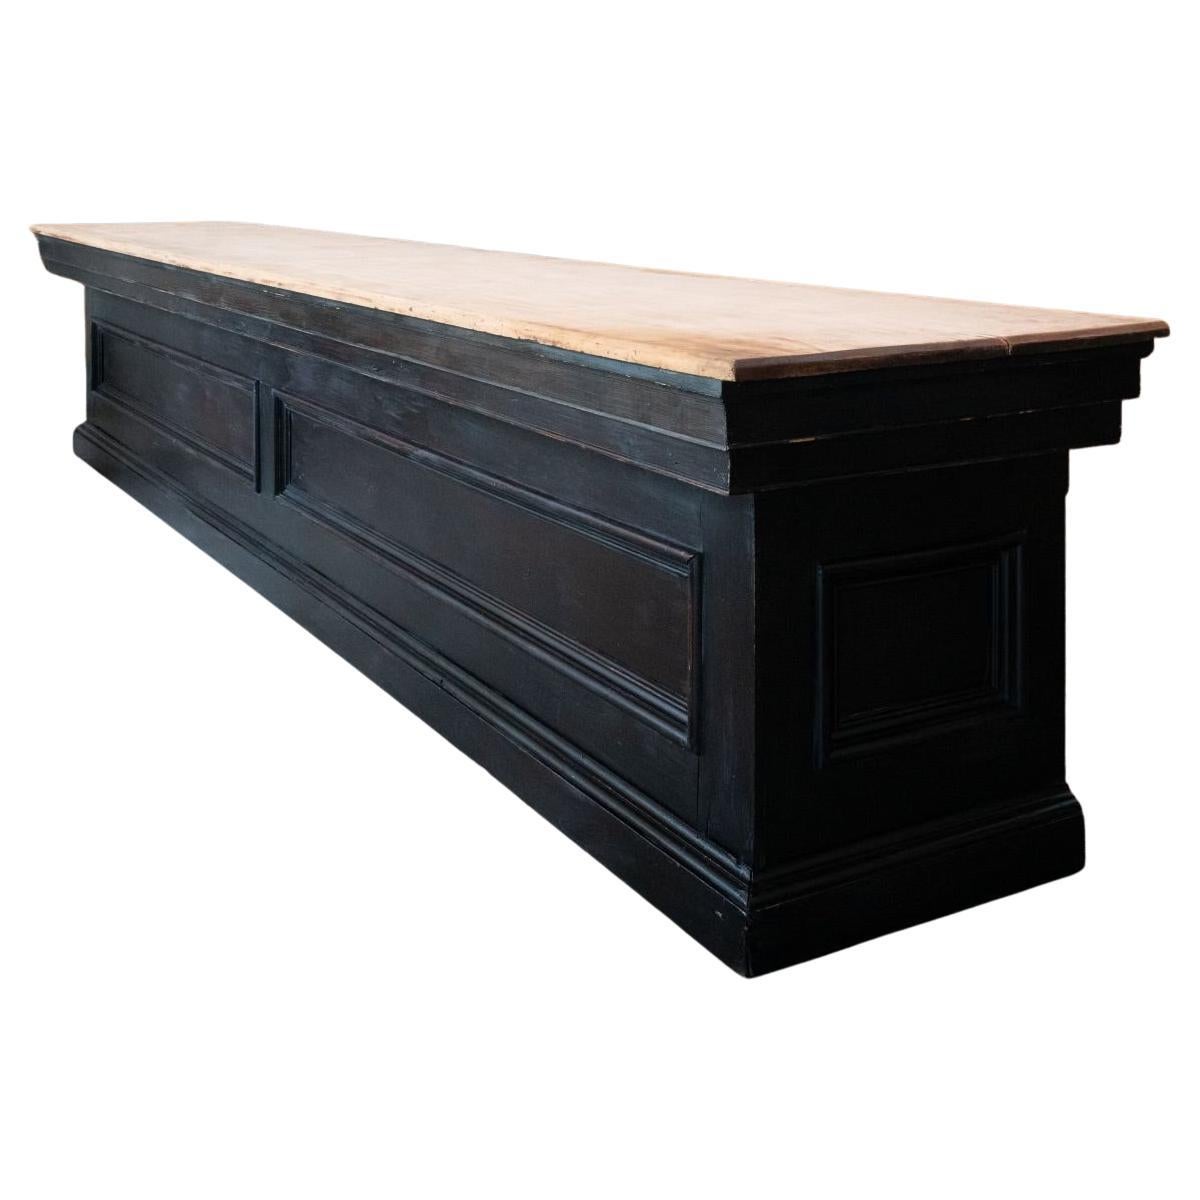 19th Century American General Store Counter For Sale